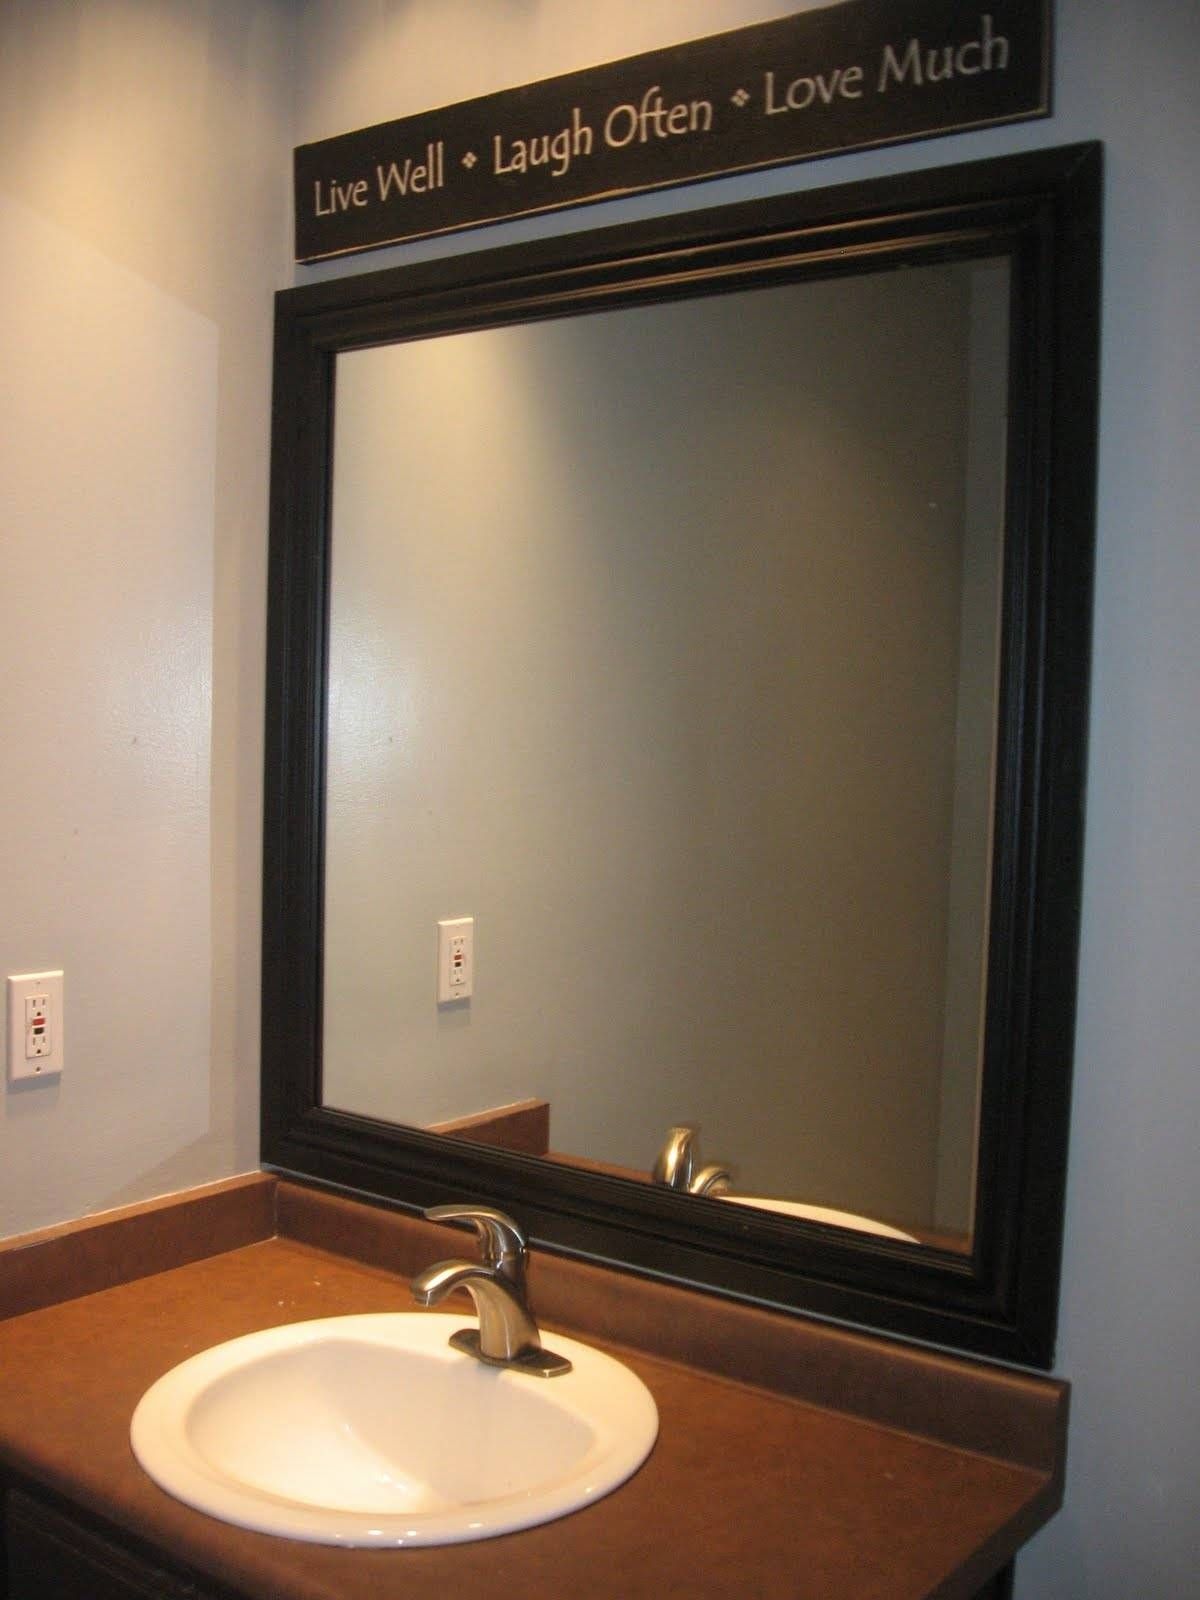 Stylish Framed Bathroom Mirrors | Home Designjohn Pertaining To Large Brown Mirrors (View 5 of 15)